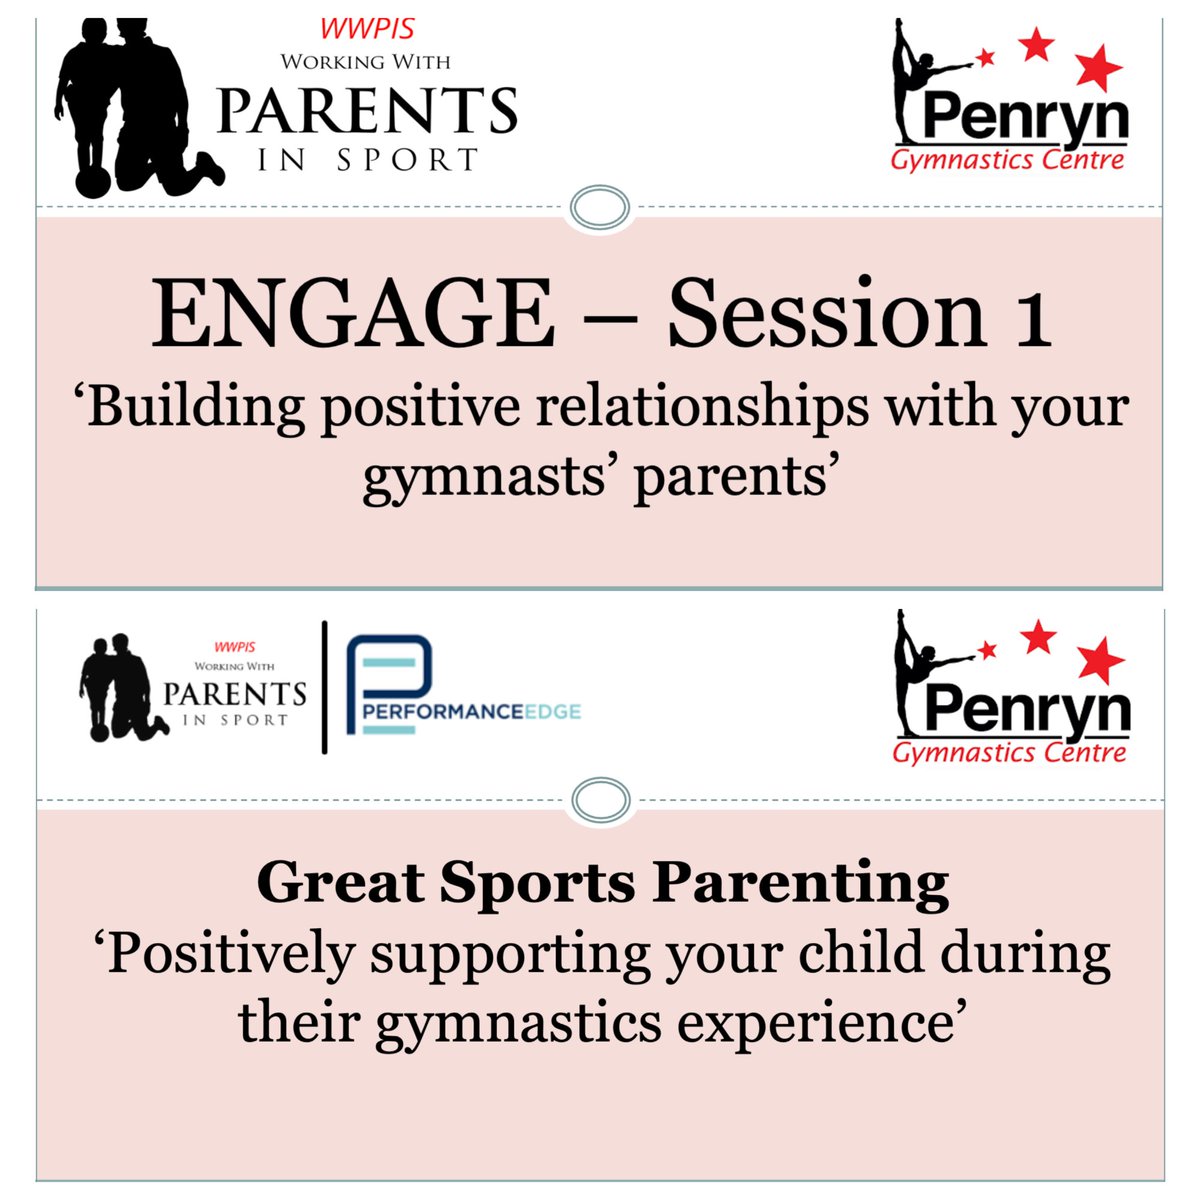 We spent a fantastic Bank Holiday working with coaches and parents at Penryn Gymnastics club. Both sessions were really well attended, there were lots of really positive and insightful interactions throughout as we all look to work positively together to help young people fulfil…